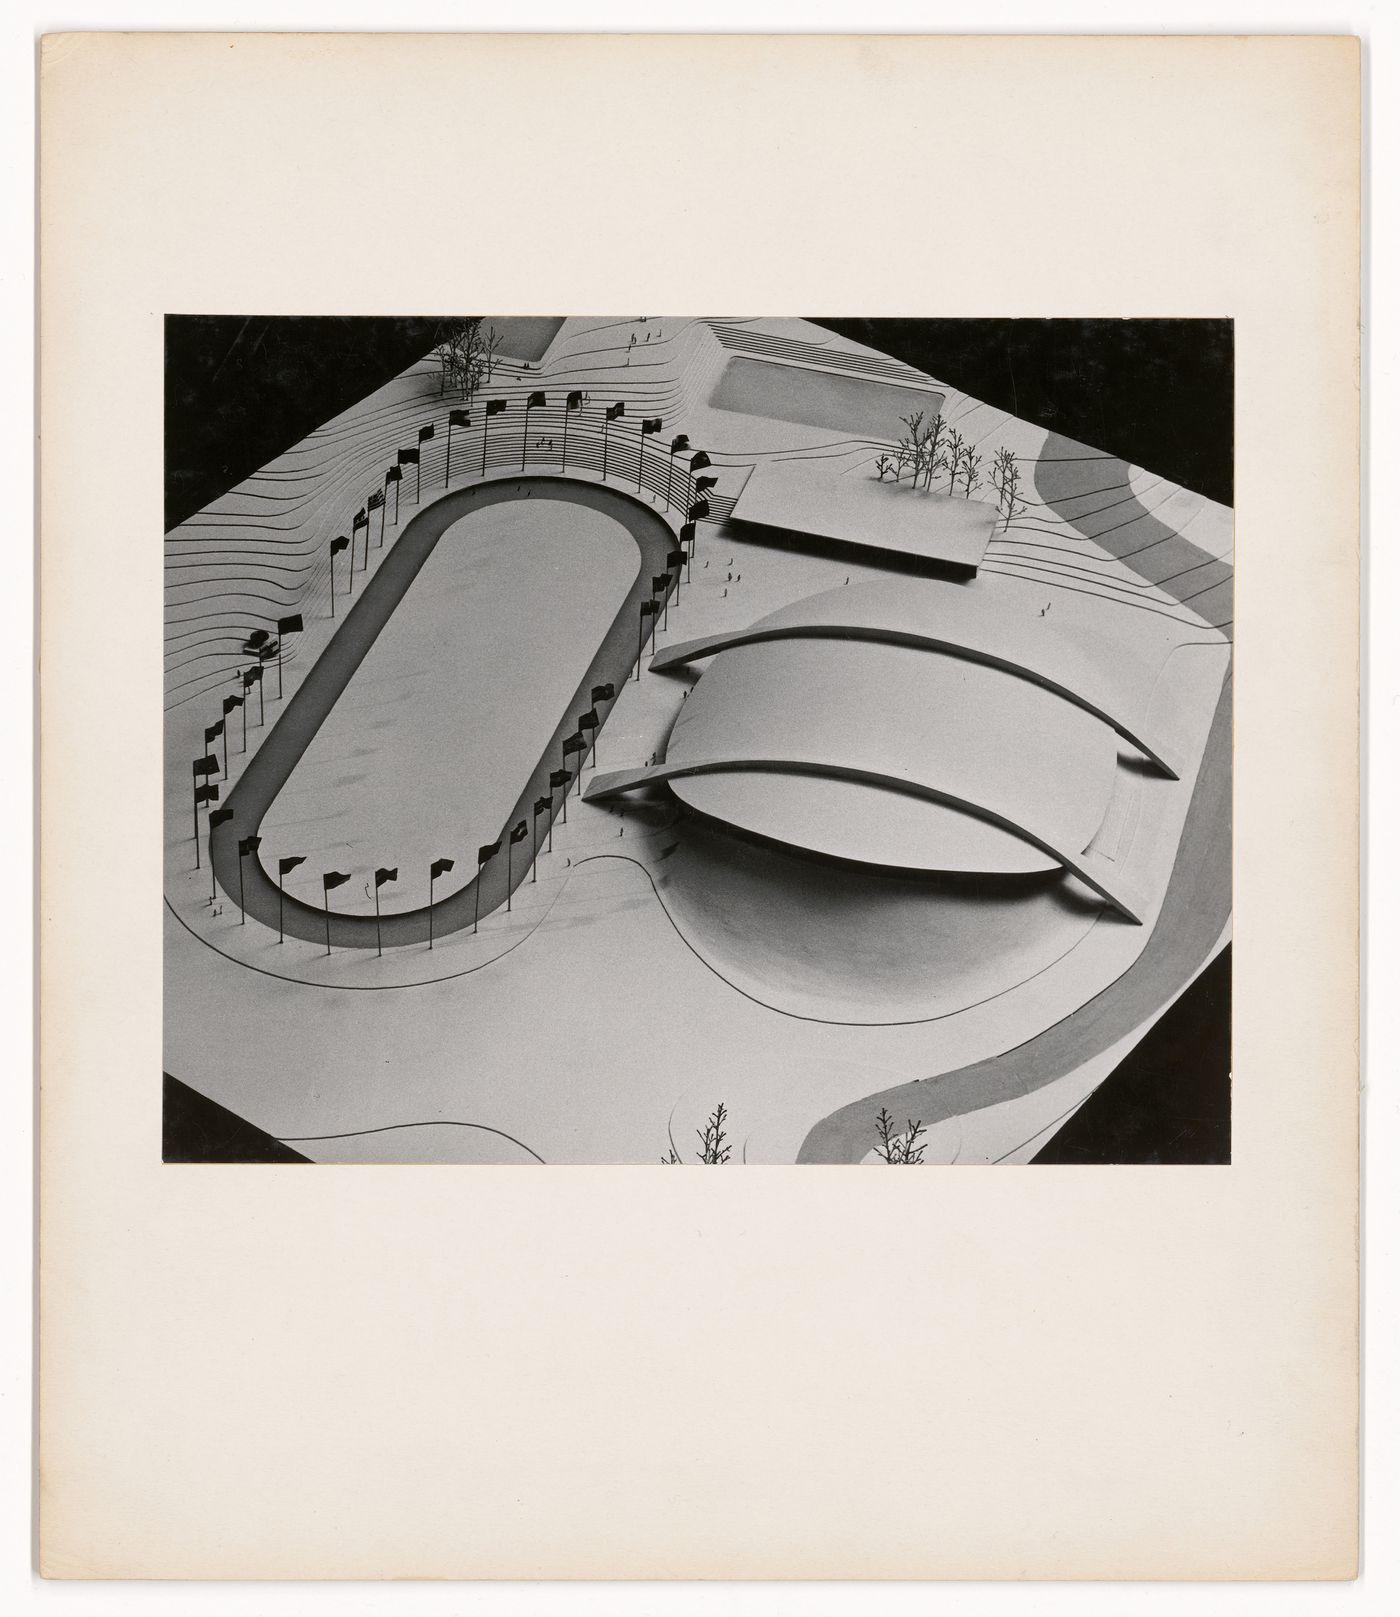 Photograph of model for Covered Stadium, Squaw Valley